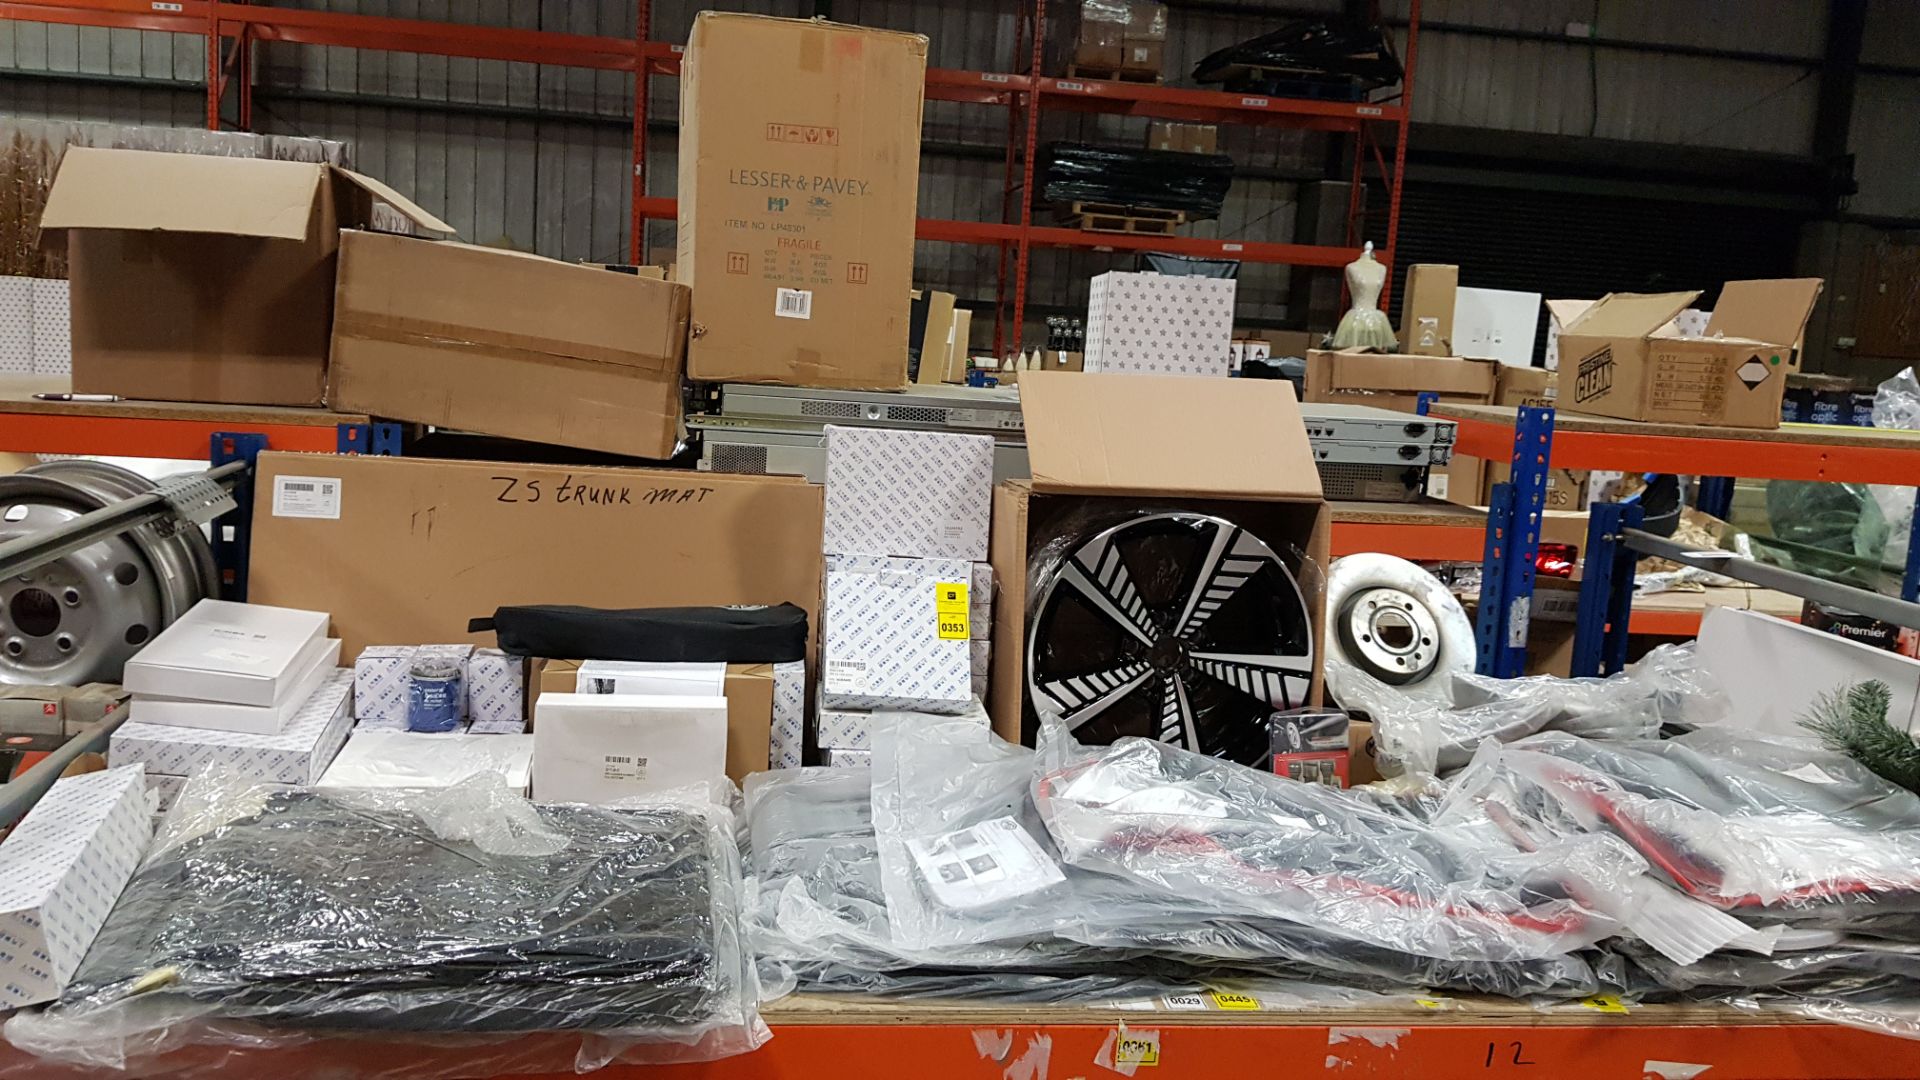 APPROX 35+ BRAND NEW PIECE MIXED ORIGINAL MG PARTS LOT CONTAINING 18 INCH ALLOW WHEEL, MG TRUNK MAT,